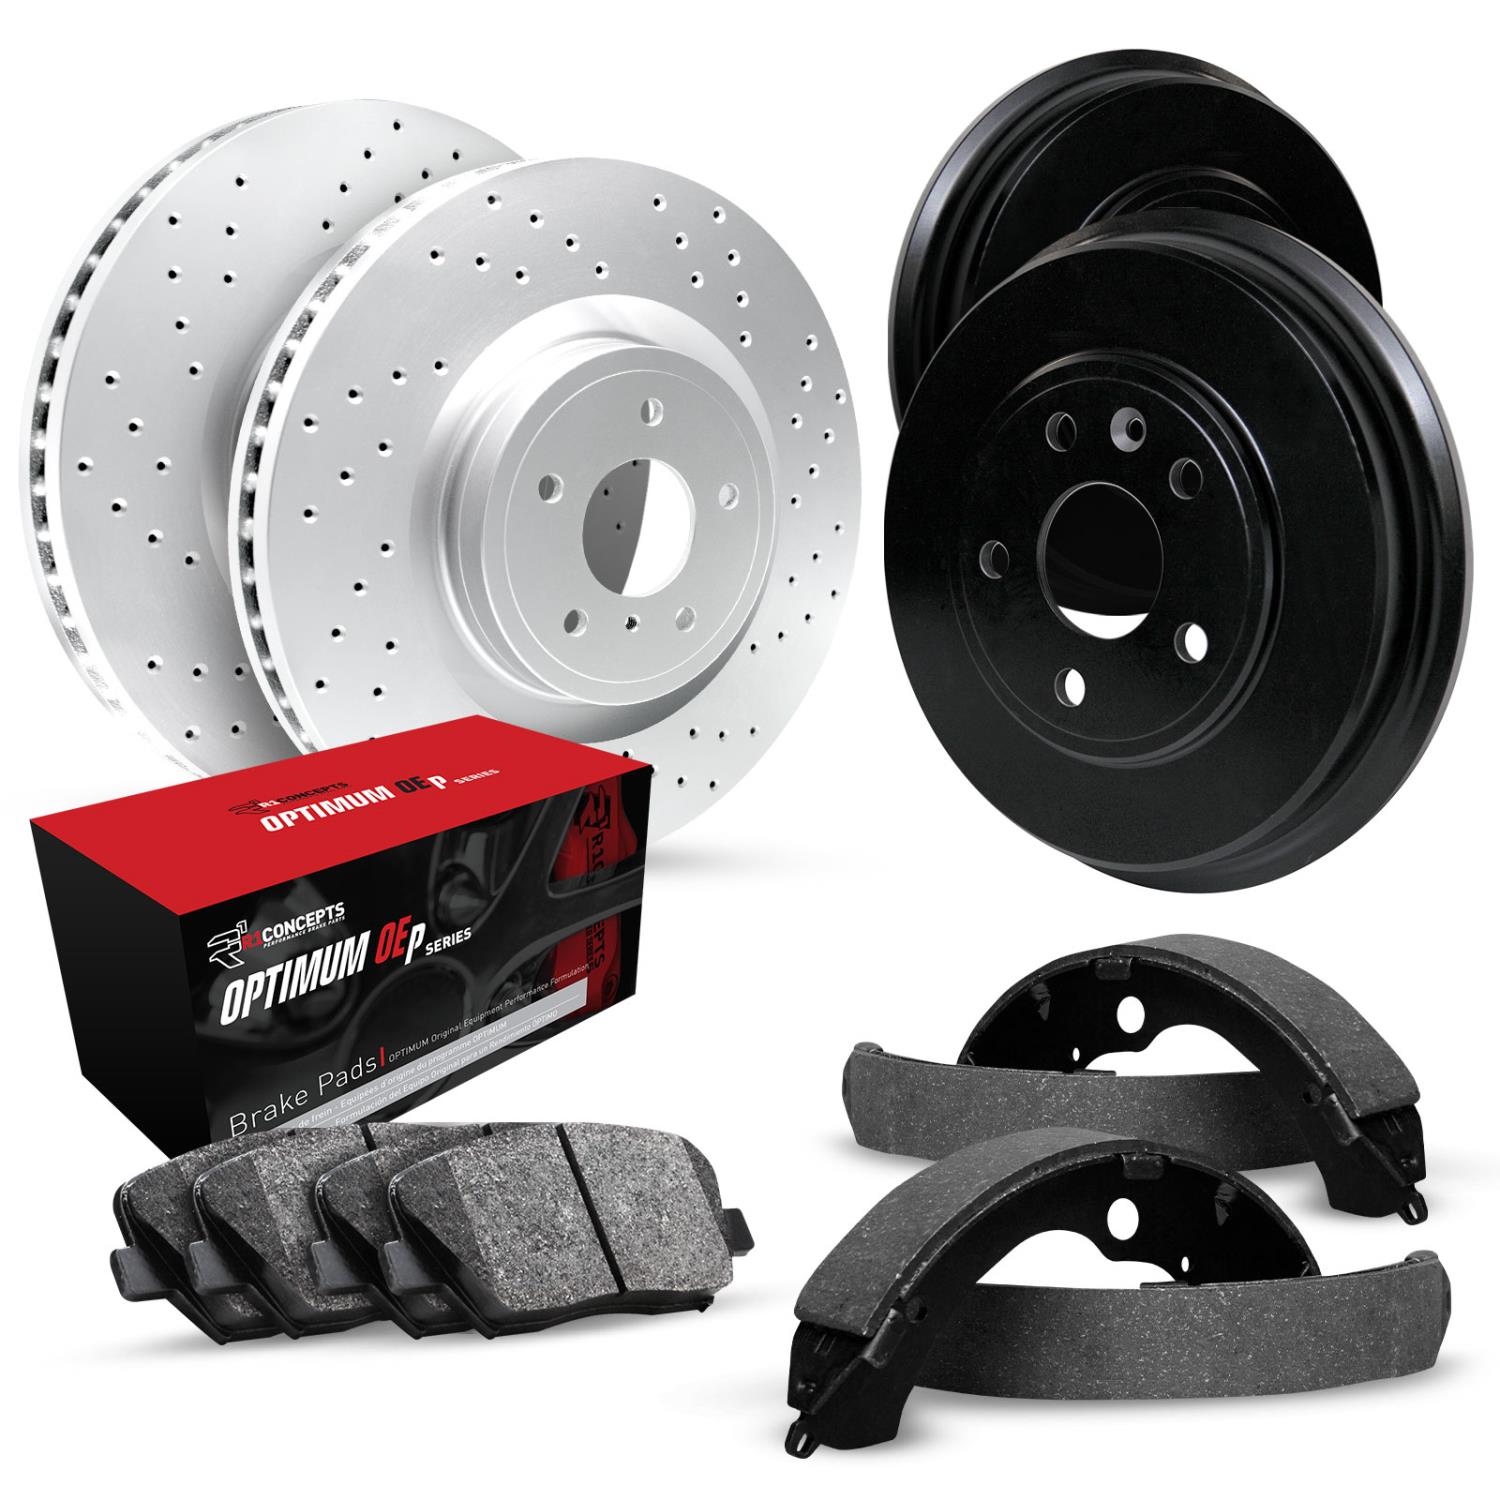 GEO-Carbon Drilled Brake Rotor & Drum Set w/Optimum OE Pads & Shoes, 1975-1978 GM, Position: Front & Rear